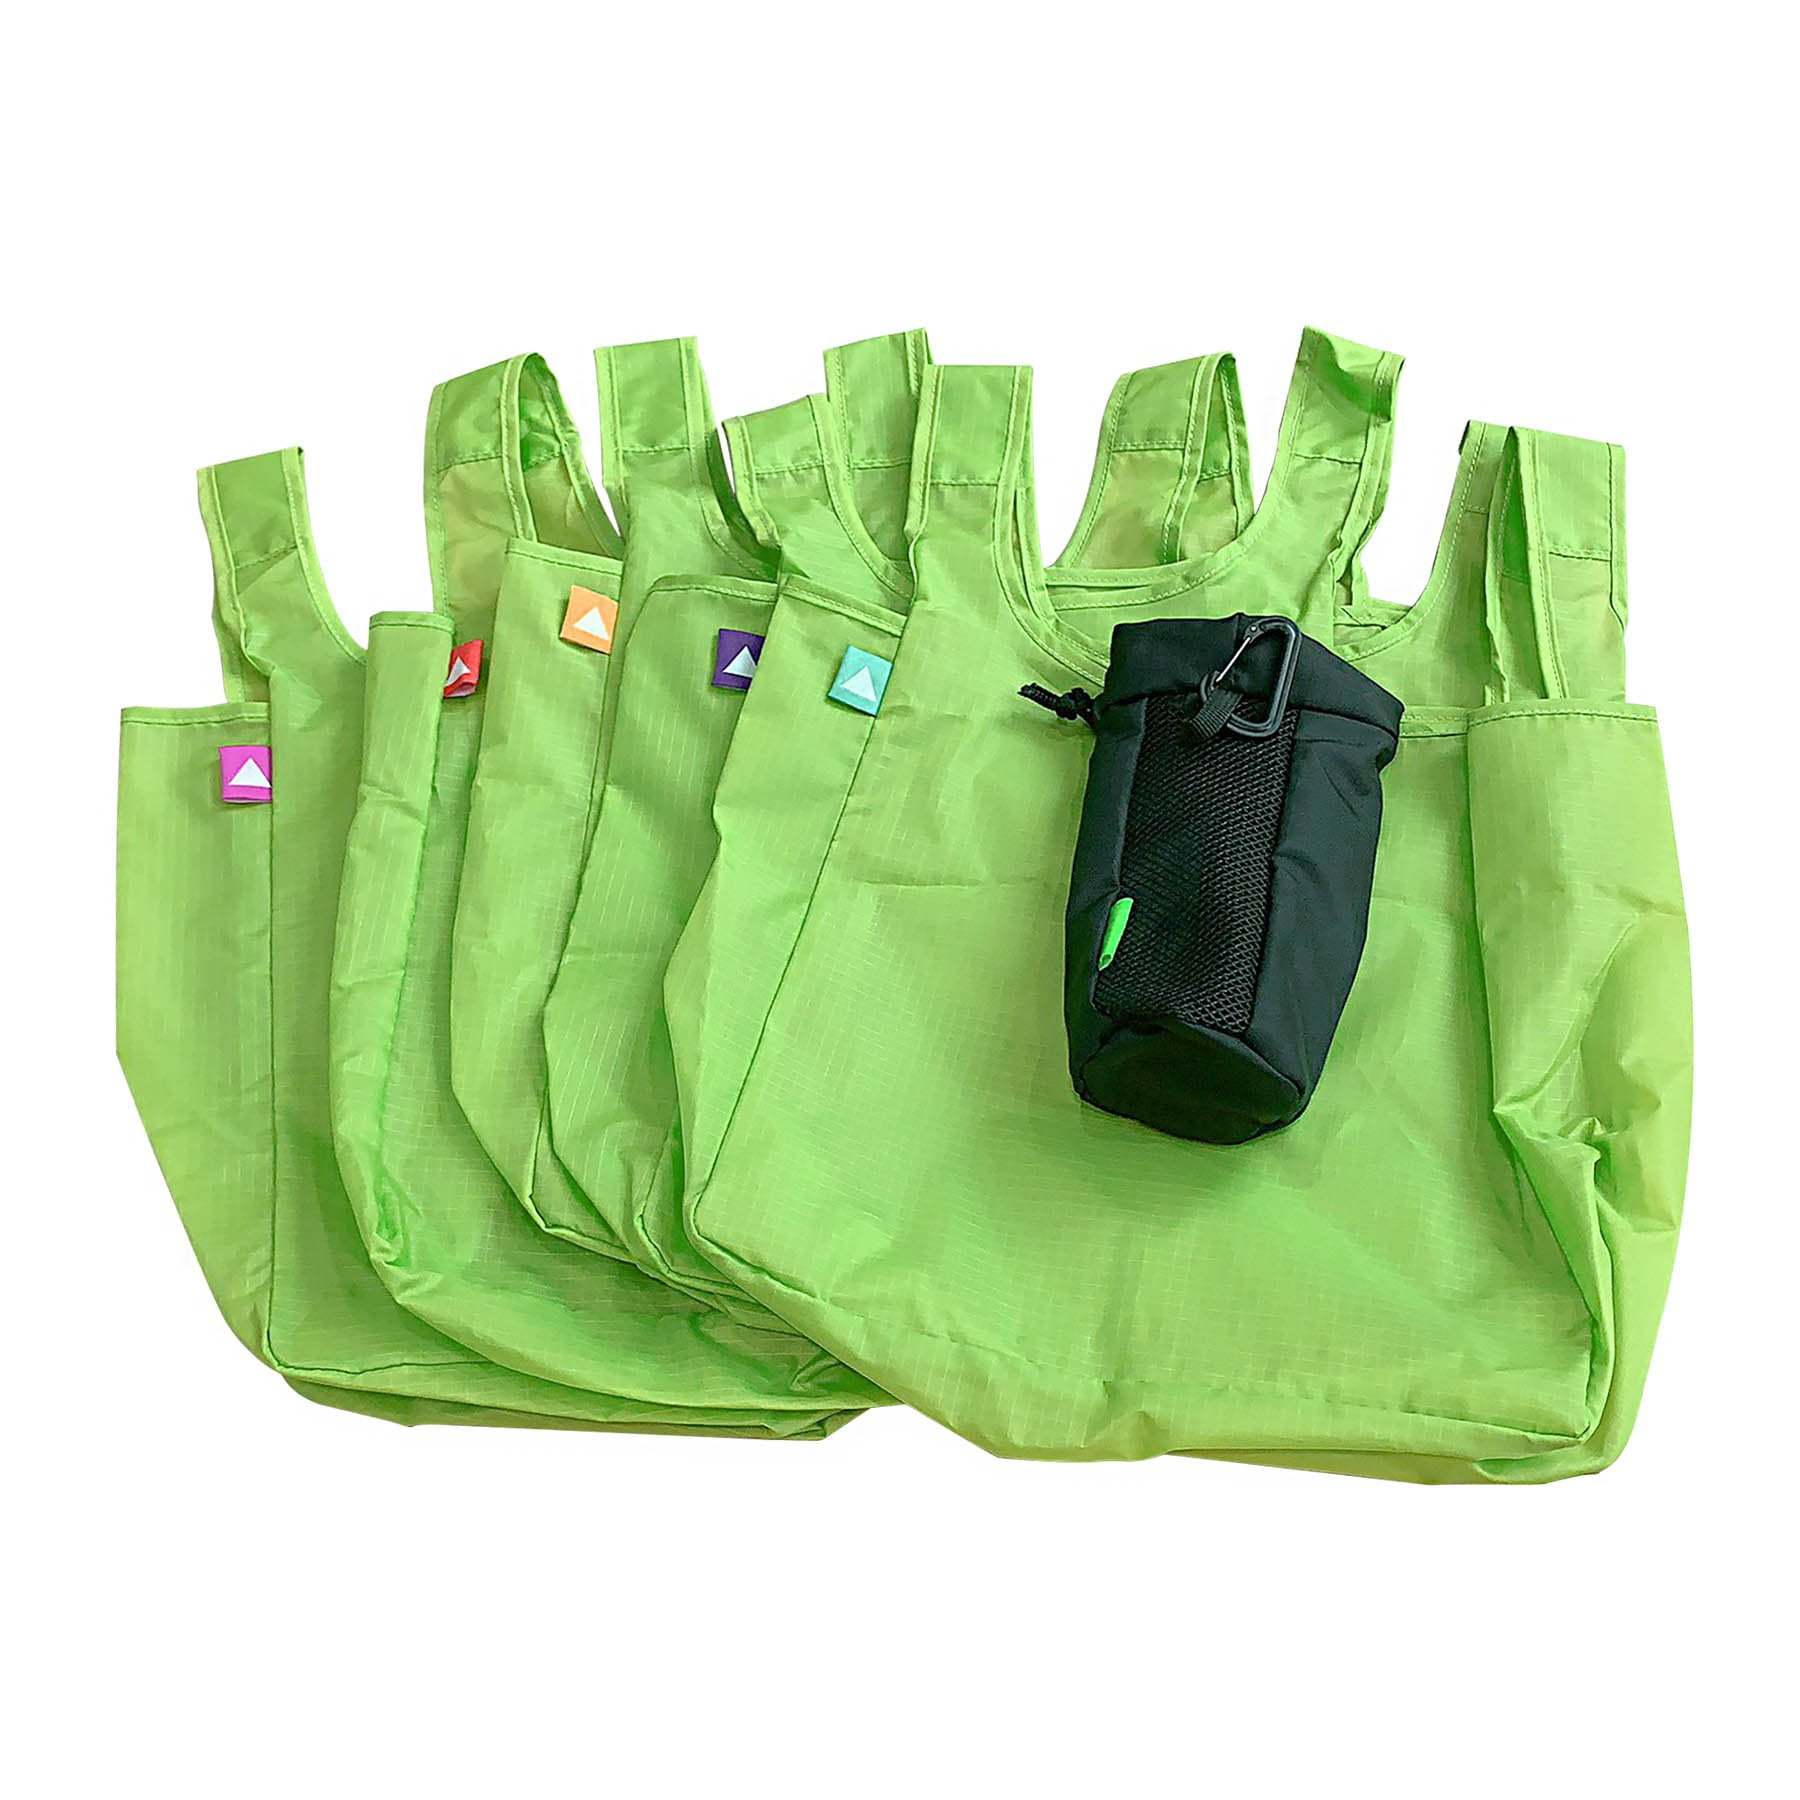 Zenpac- Green Ripstop Nylon Grocery Bags with Pouch Compact 5 Pack